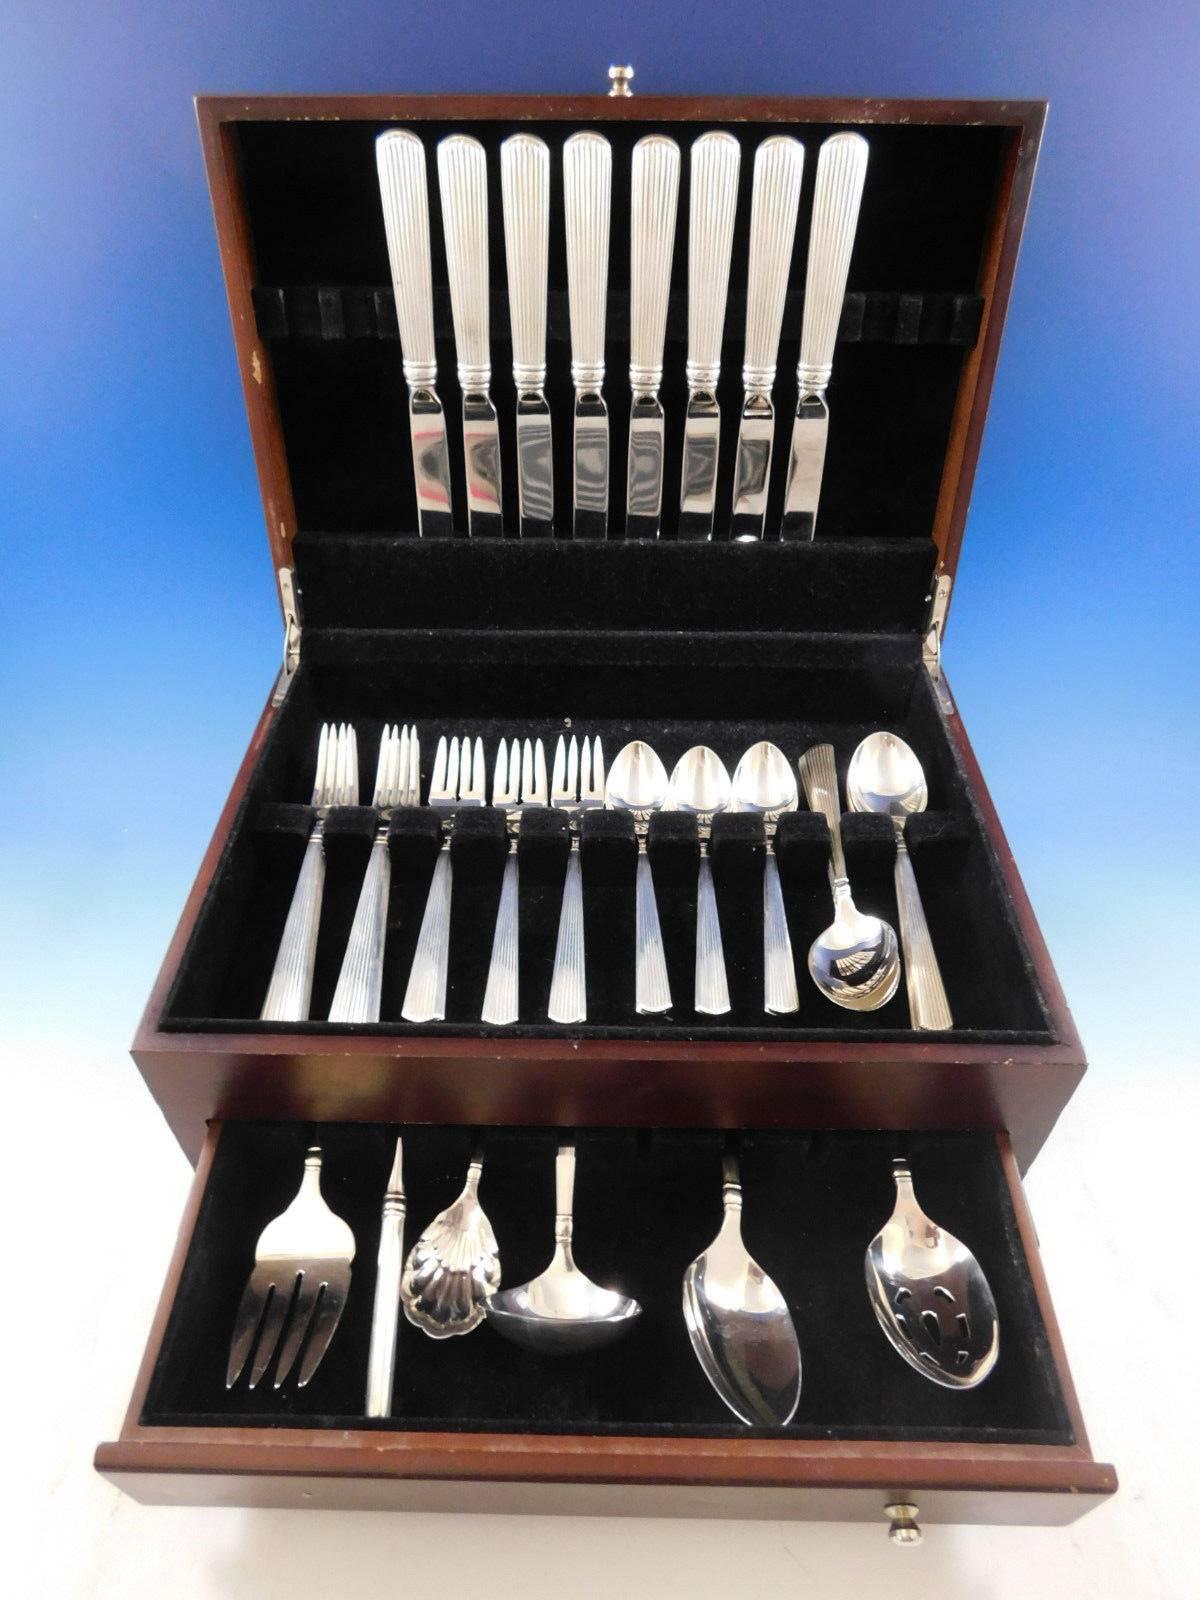 Dinner size timeless Ashmont pattern by Reed & Barton sterling silver flatware set, 46 pieces. This set includes: 

Eight dinner size knives, 9 7/8